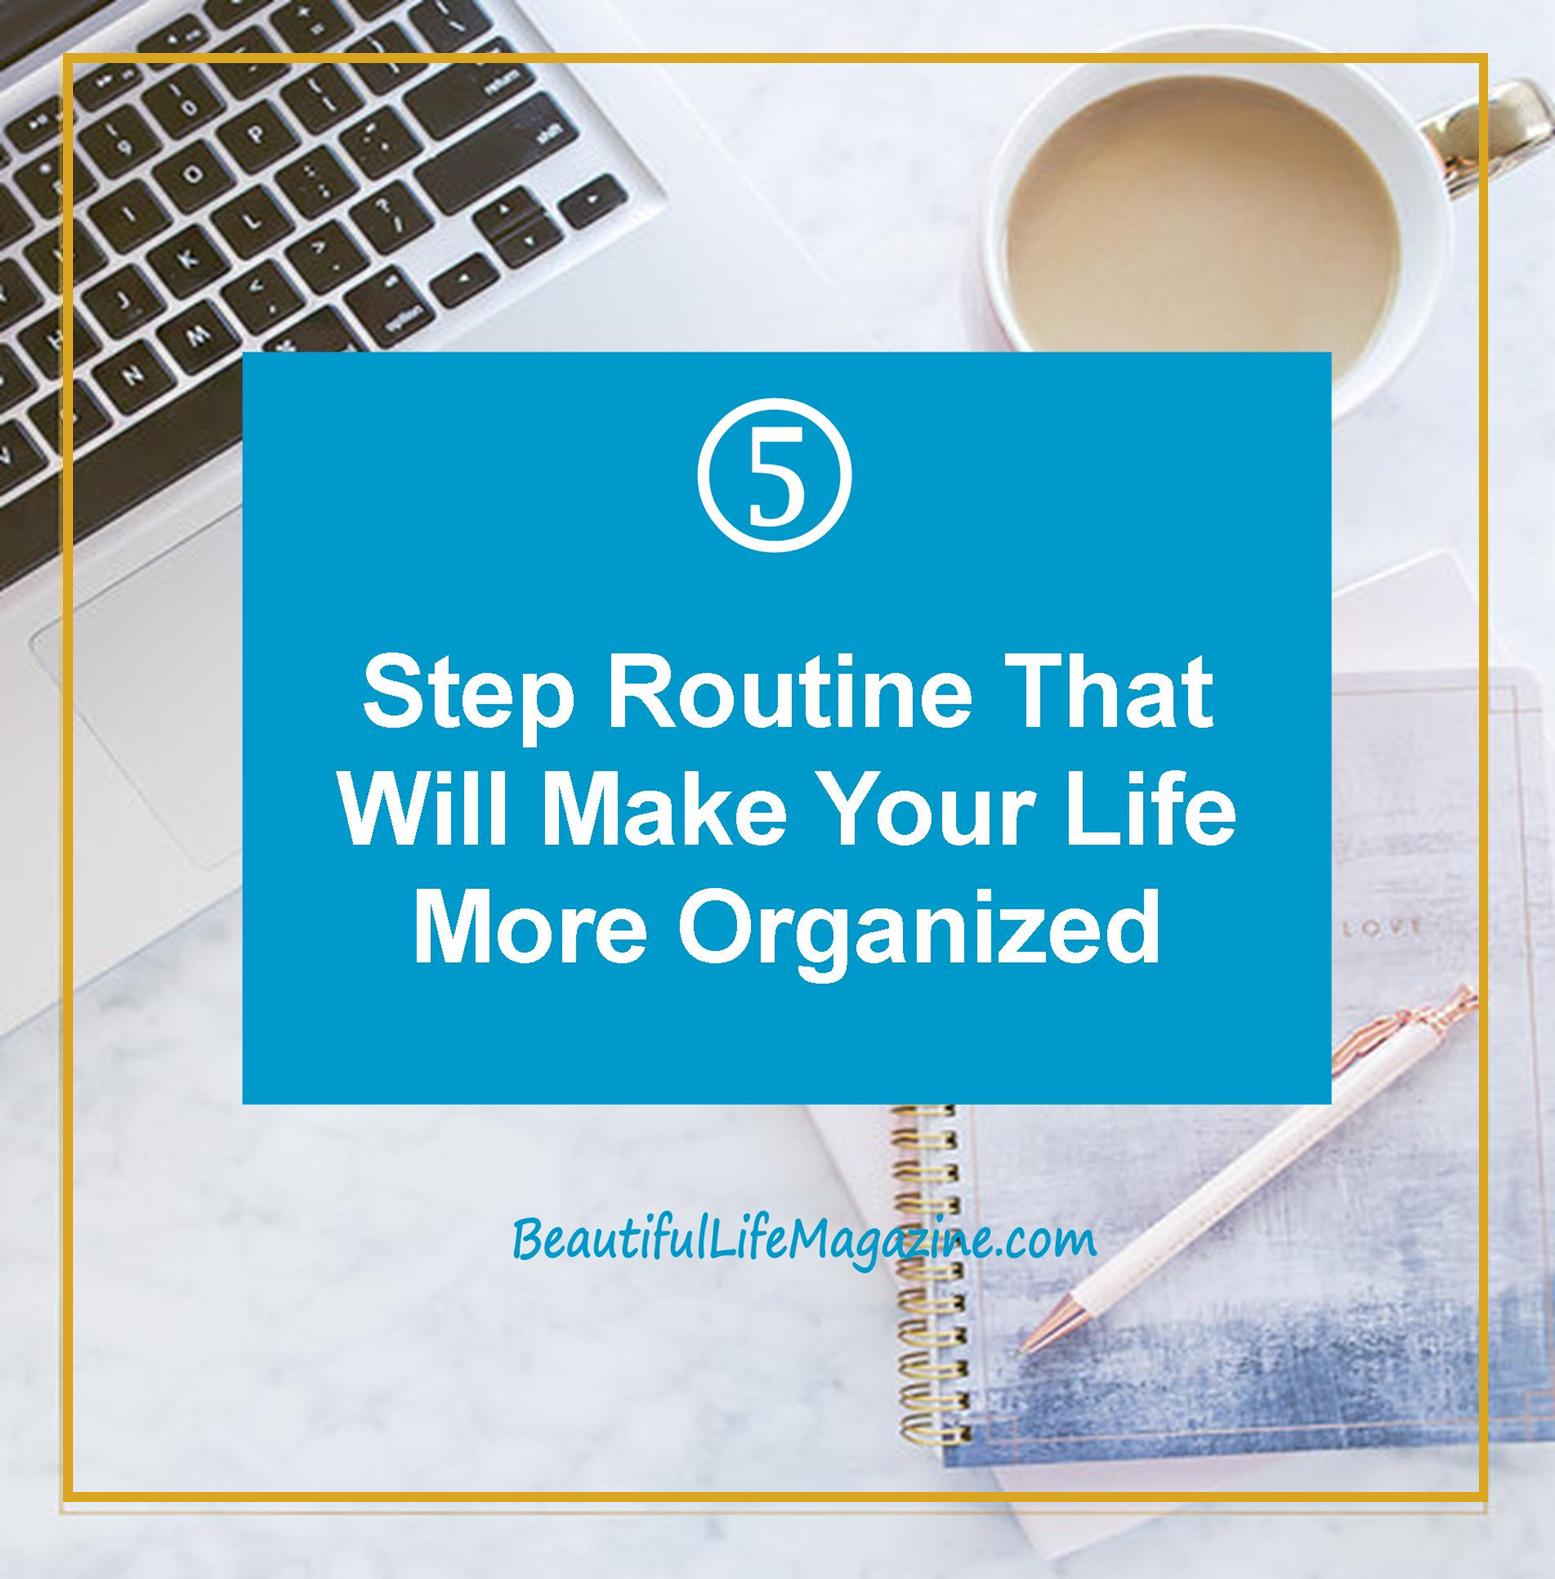 Whenever I start feeling overwhelmed and not so organized, I refer to these five steps to get on top of my life again and start enjoying my free time!